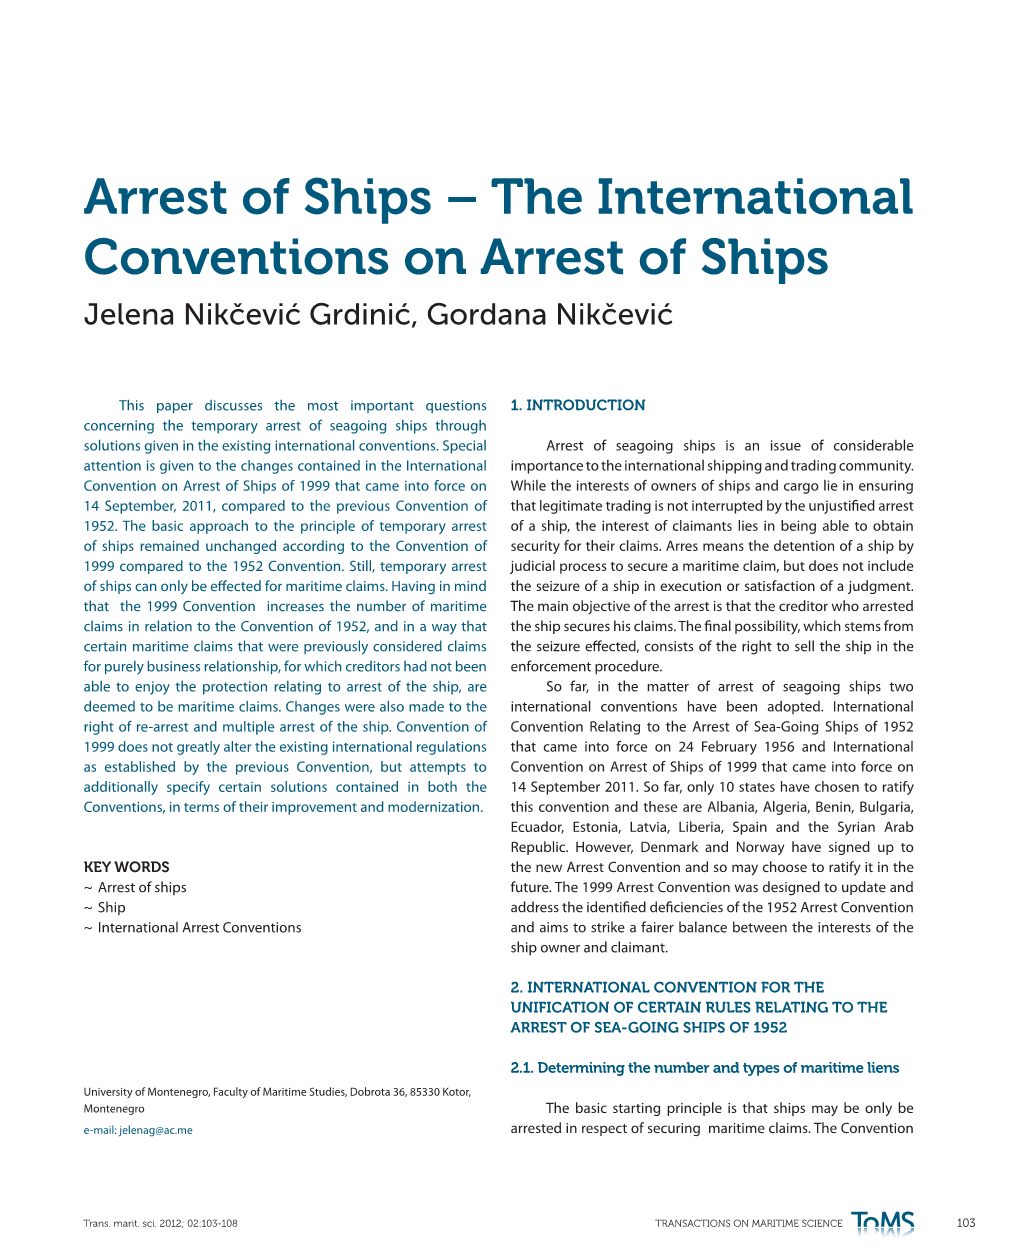 Arrest of Ships – the International Conventions on Arrest of Ships to the Same Owner After Adoption of the 1952 Convention